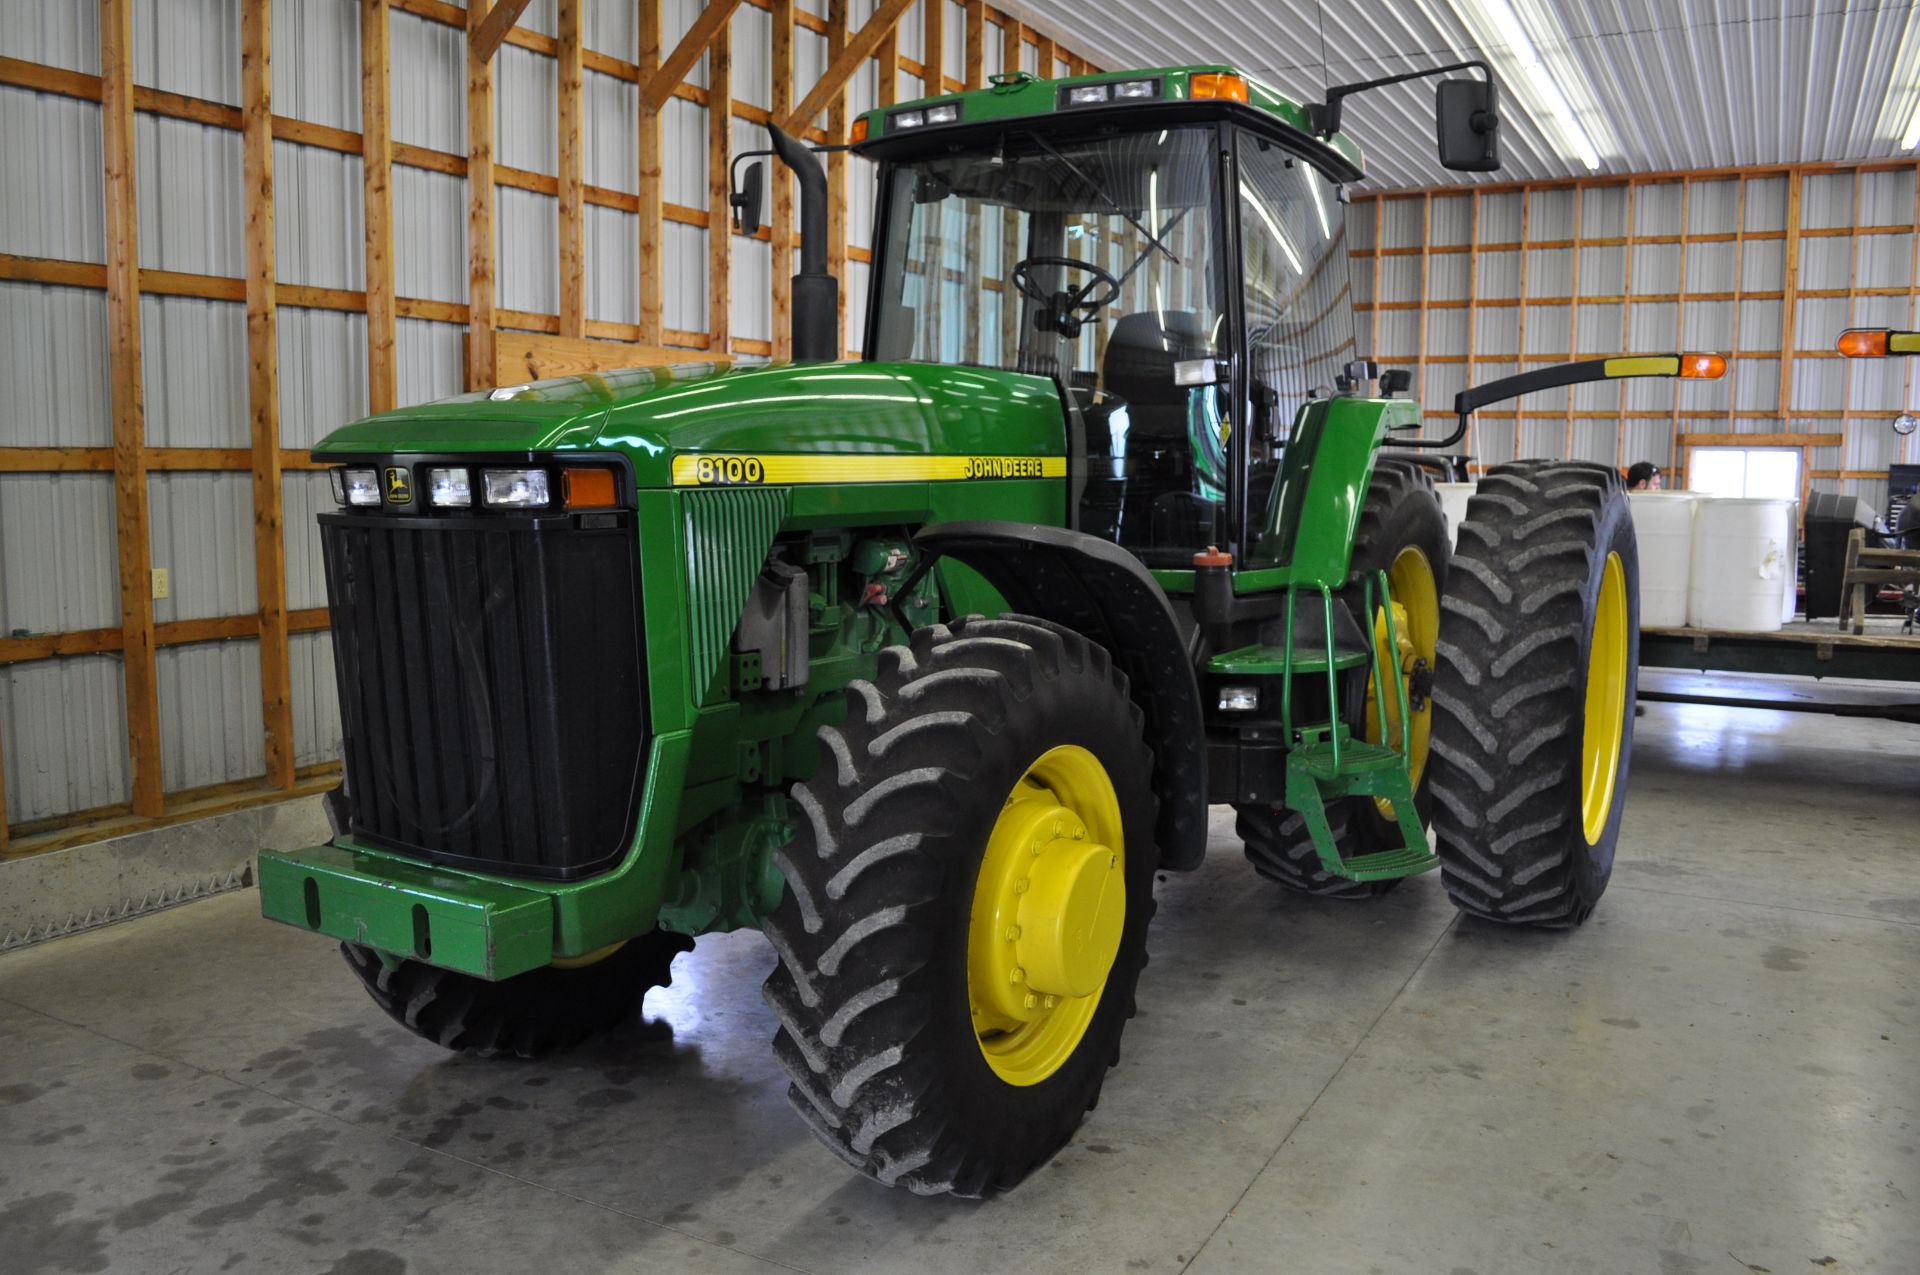 John Deere 8100 tractor, 18.4 R 42 duals, 380/85 R 30 tires, MFWD, powershift, 3 hyd remotes